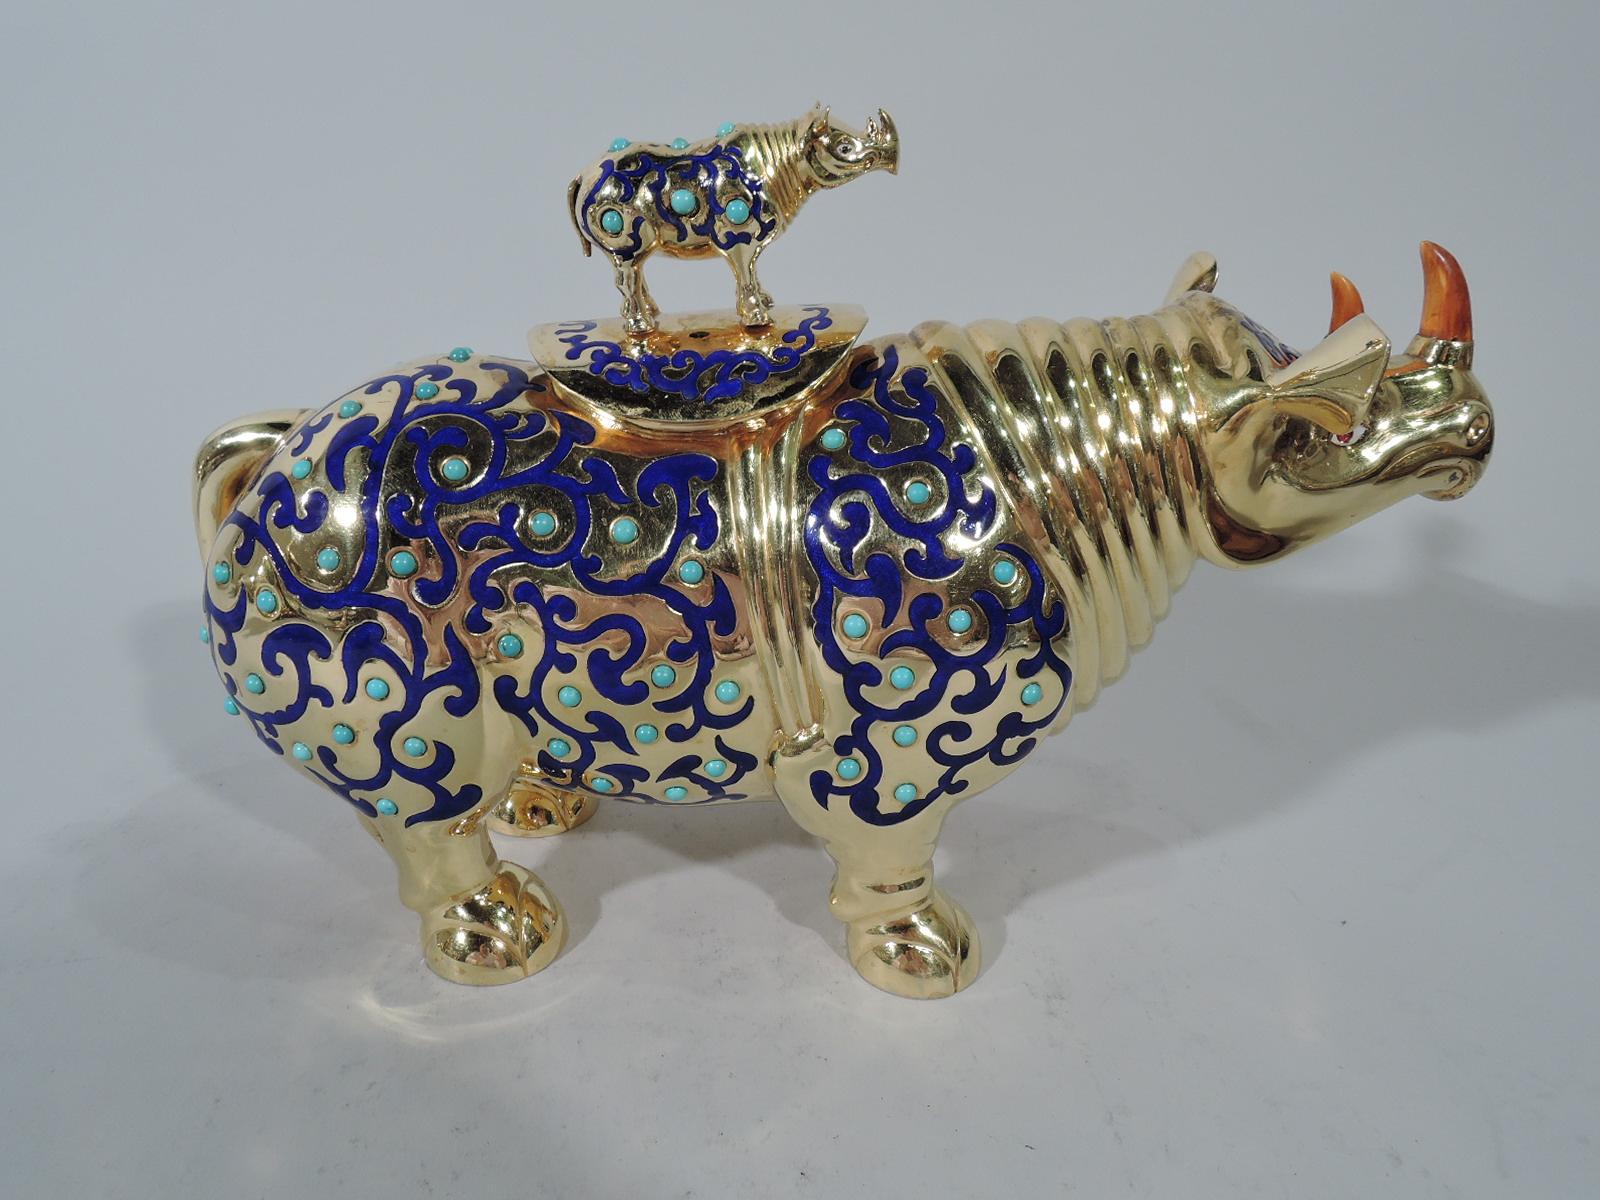 Chinese silver gilt and enamel box. Rhinoceros-form with flexed ears, concentric neck rings, short stumpy legs, and outsized hoofs. Rich yellow gilding embellished with cobalt enamel scrollwork and cabochon-cut turquoise beads. Oval dorsal cover